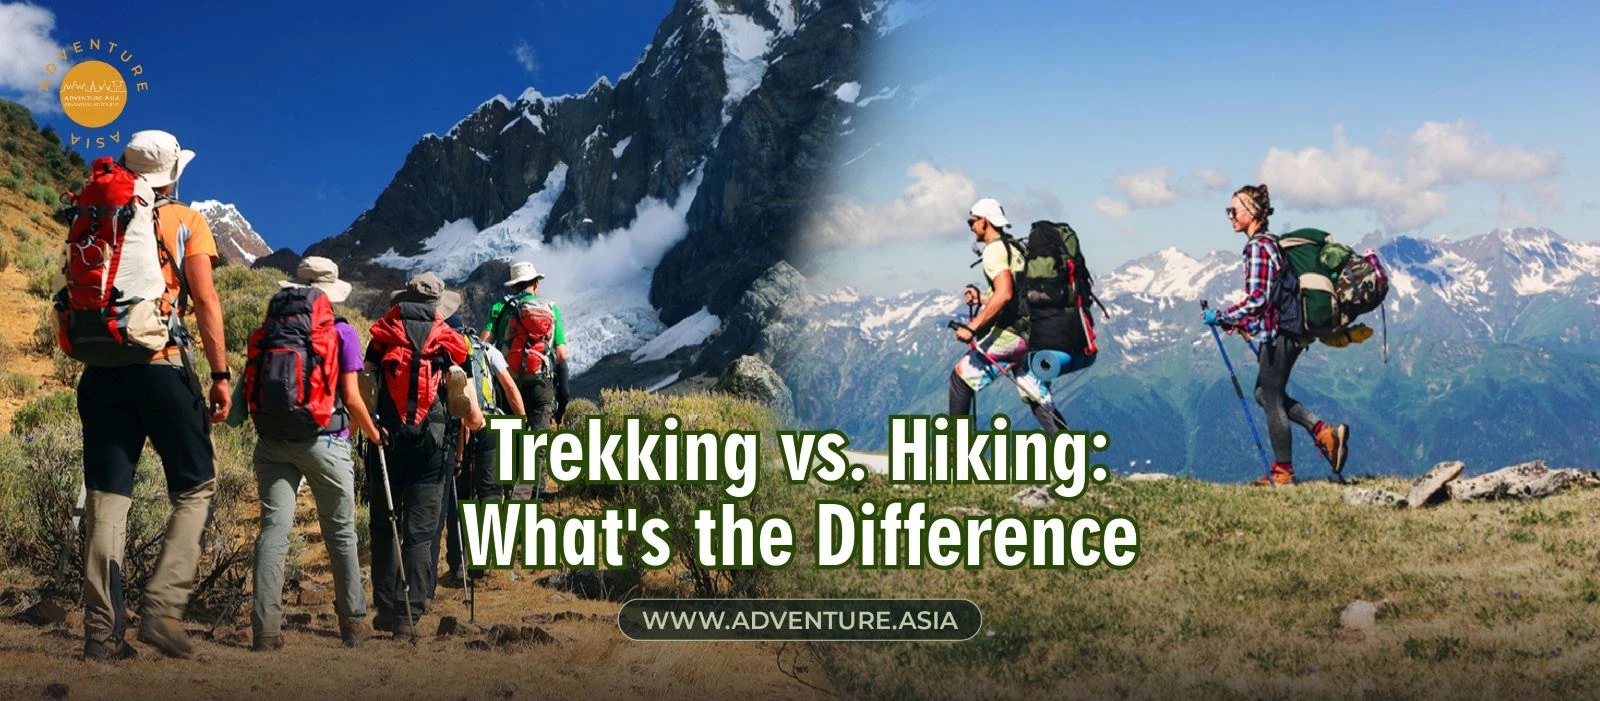 Differences Between Trekking And Hiking